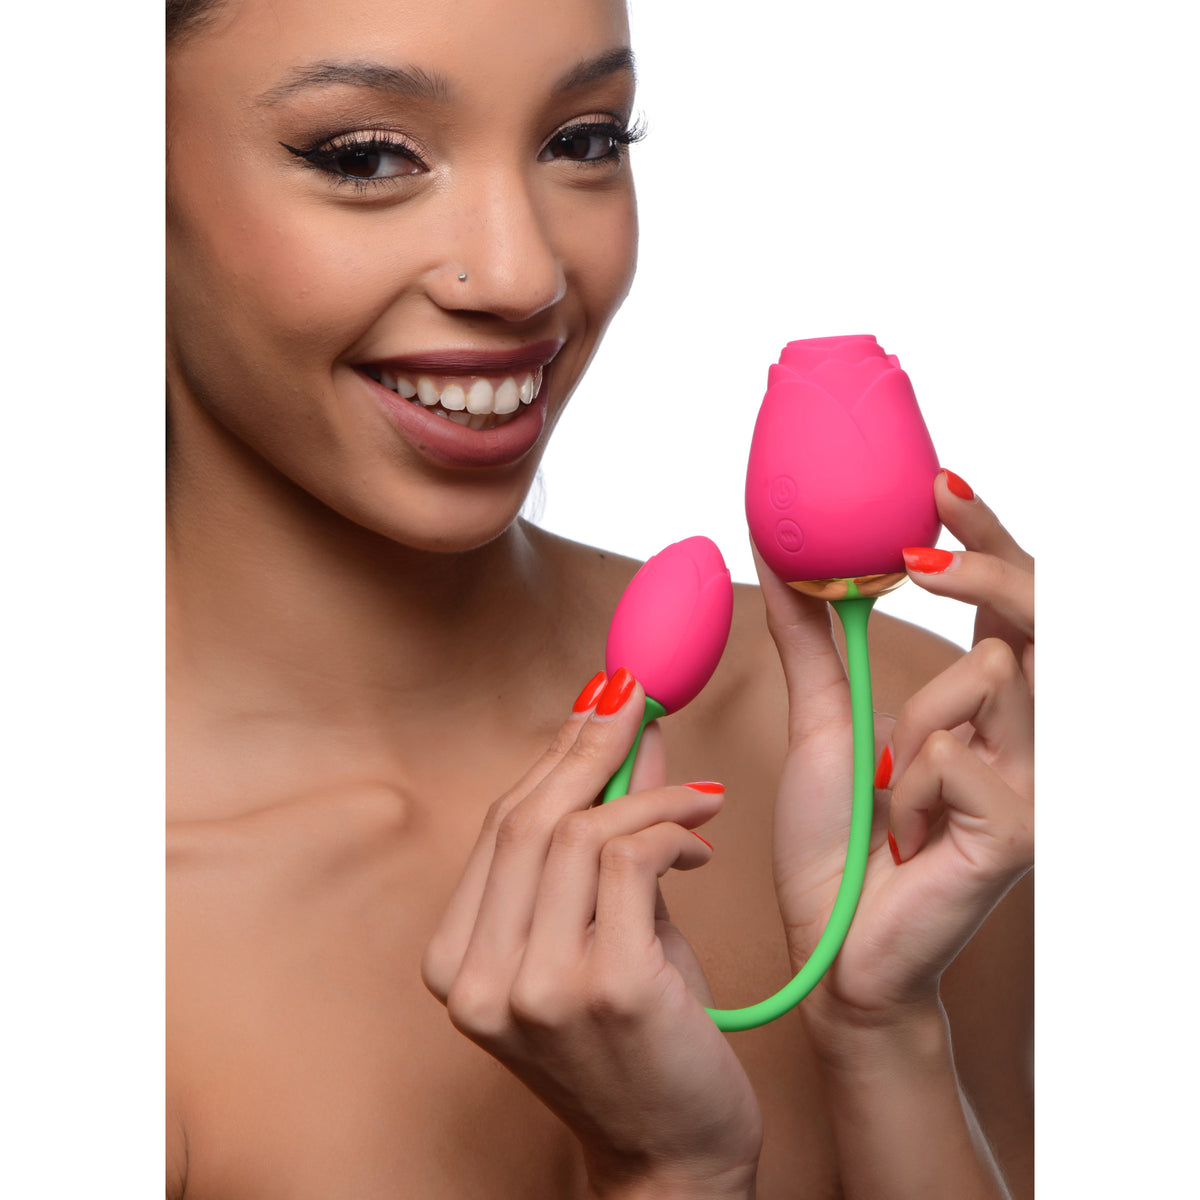 Bloomgasm Rose Duet Sucking & Vibrating Silicone Duo